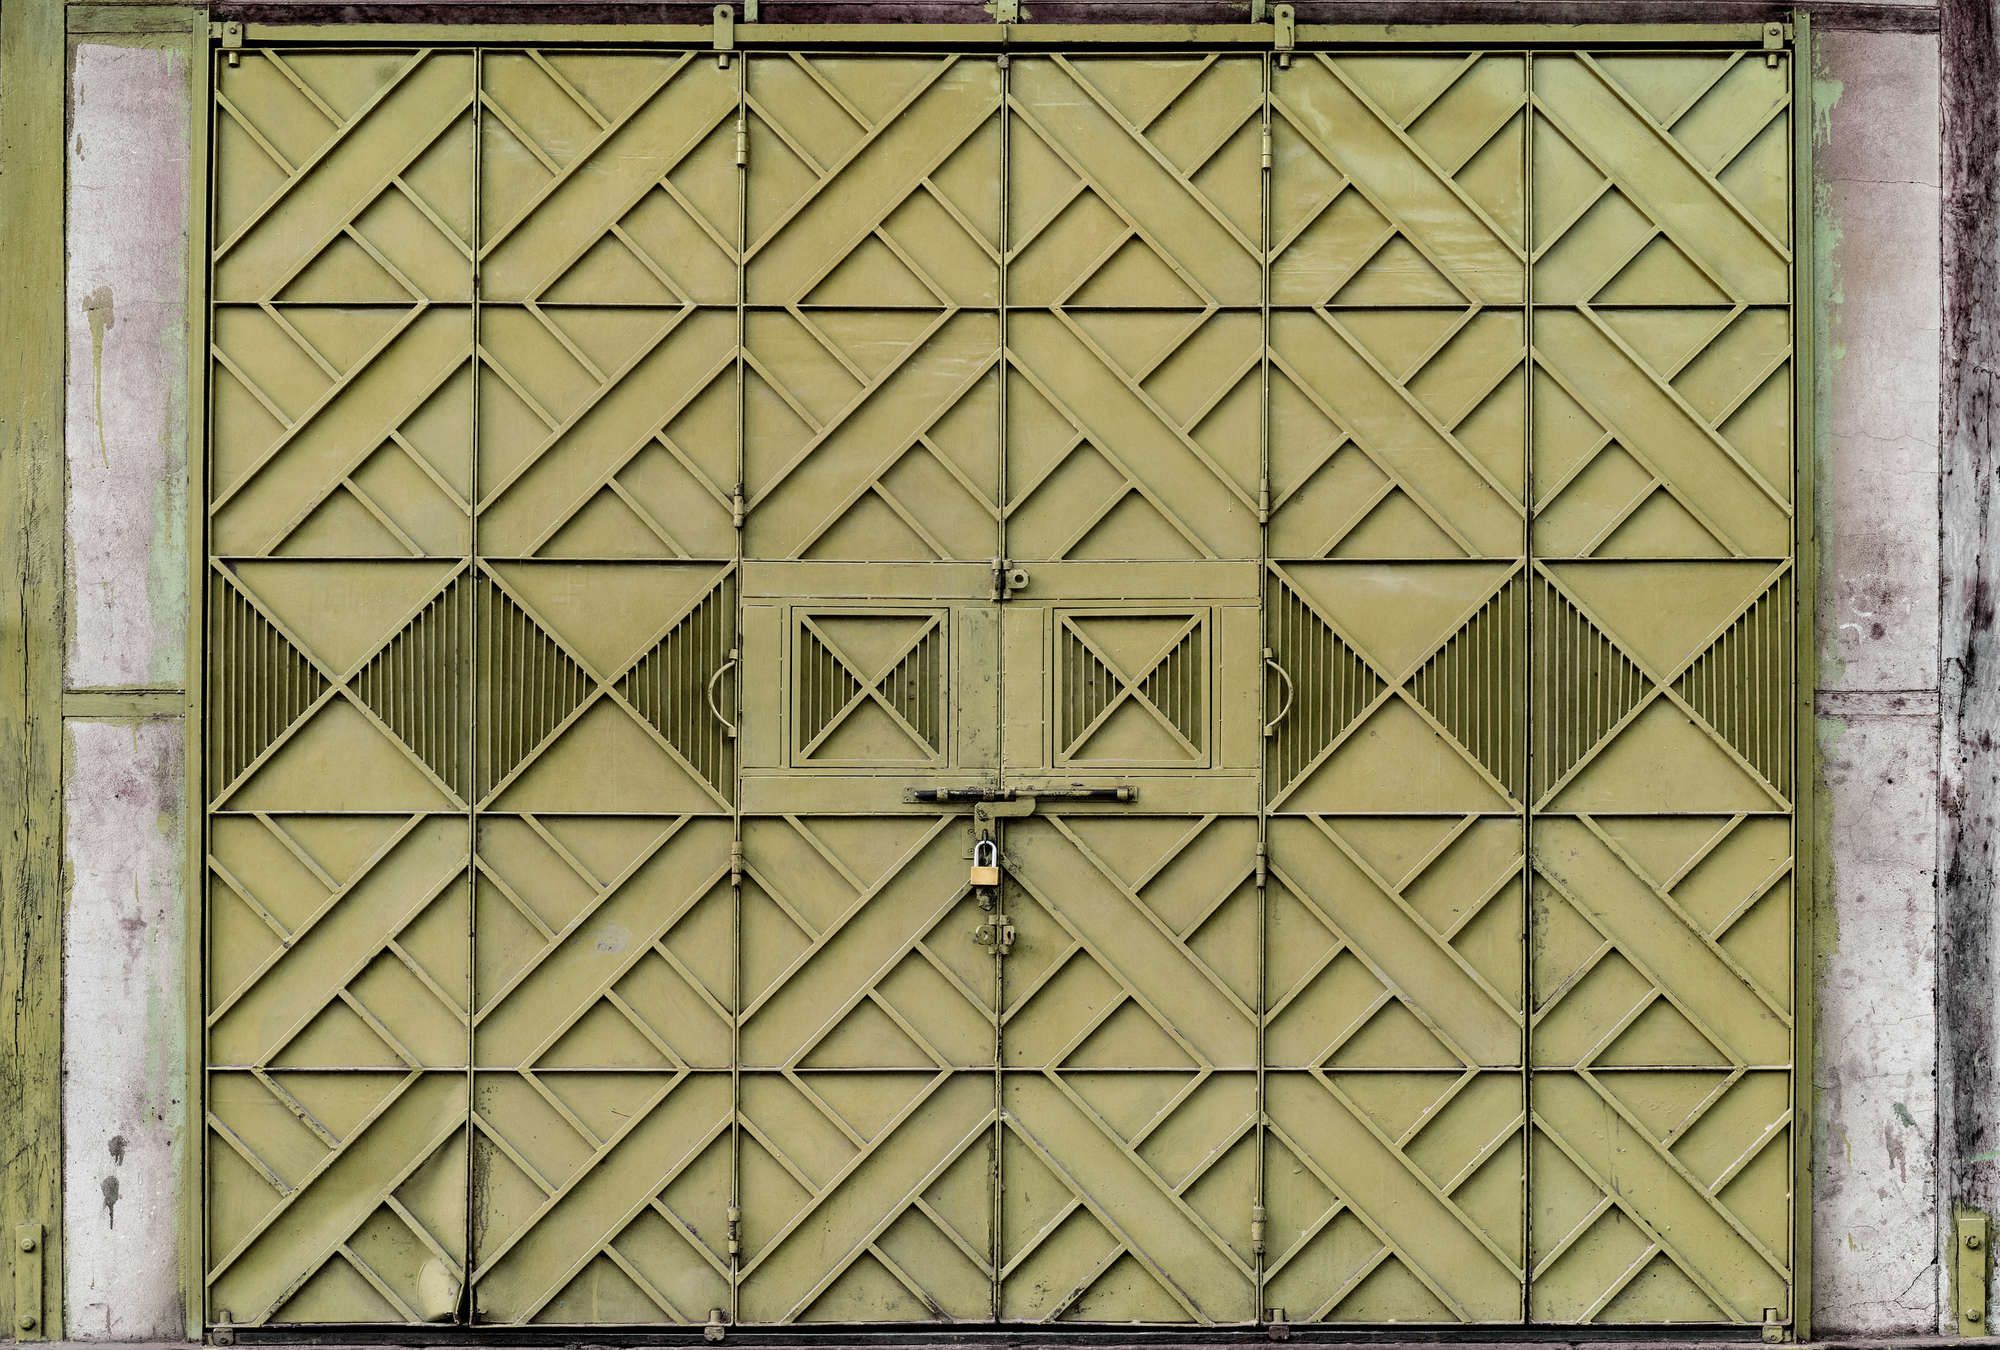             Photo wallpaper »agra« - Close-up of a green metal gate with diamond-shaped decorations - Lightly textured non-woven fabric
        